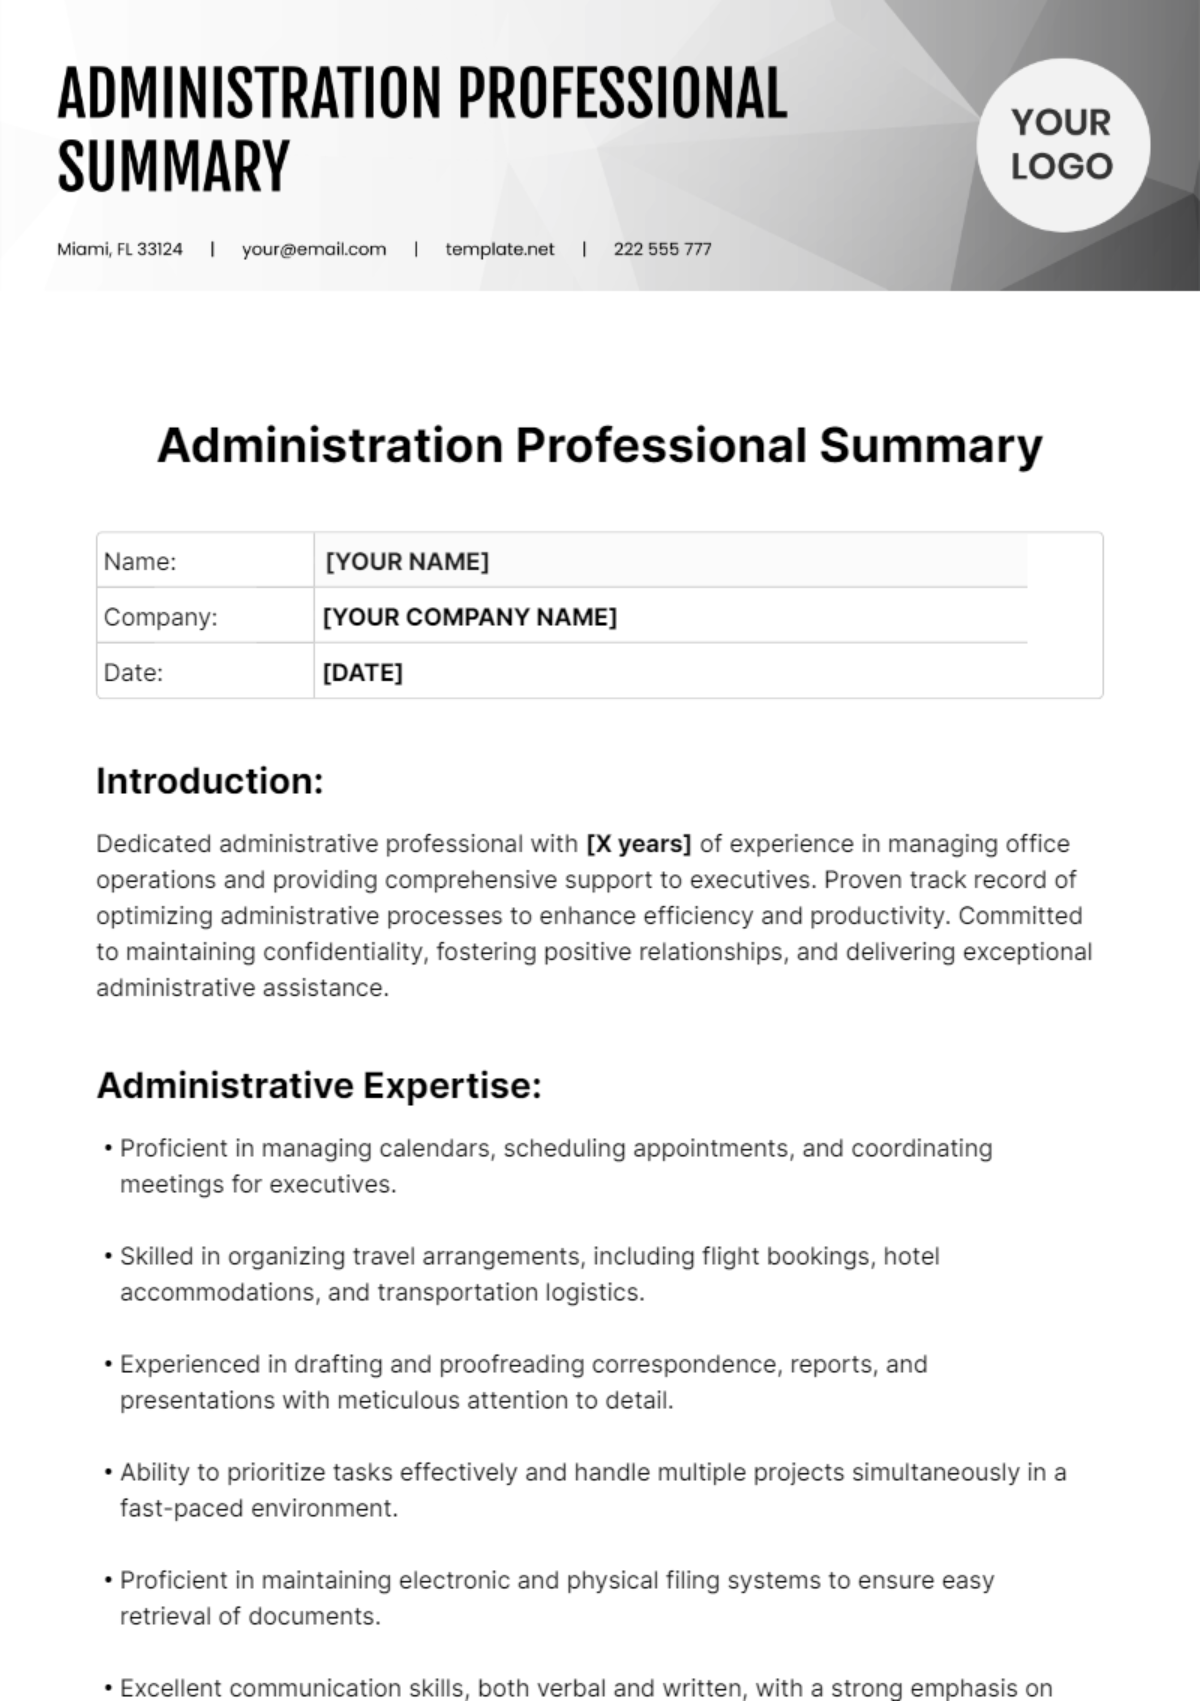 Administration Resume Summary Template